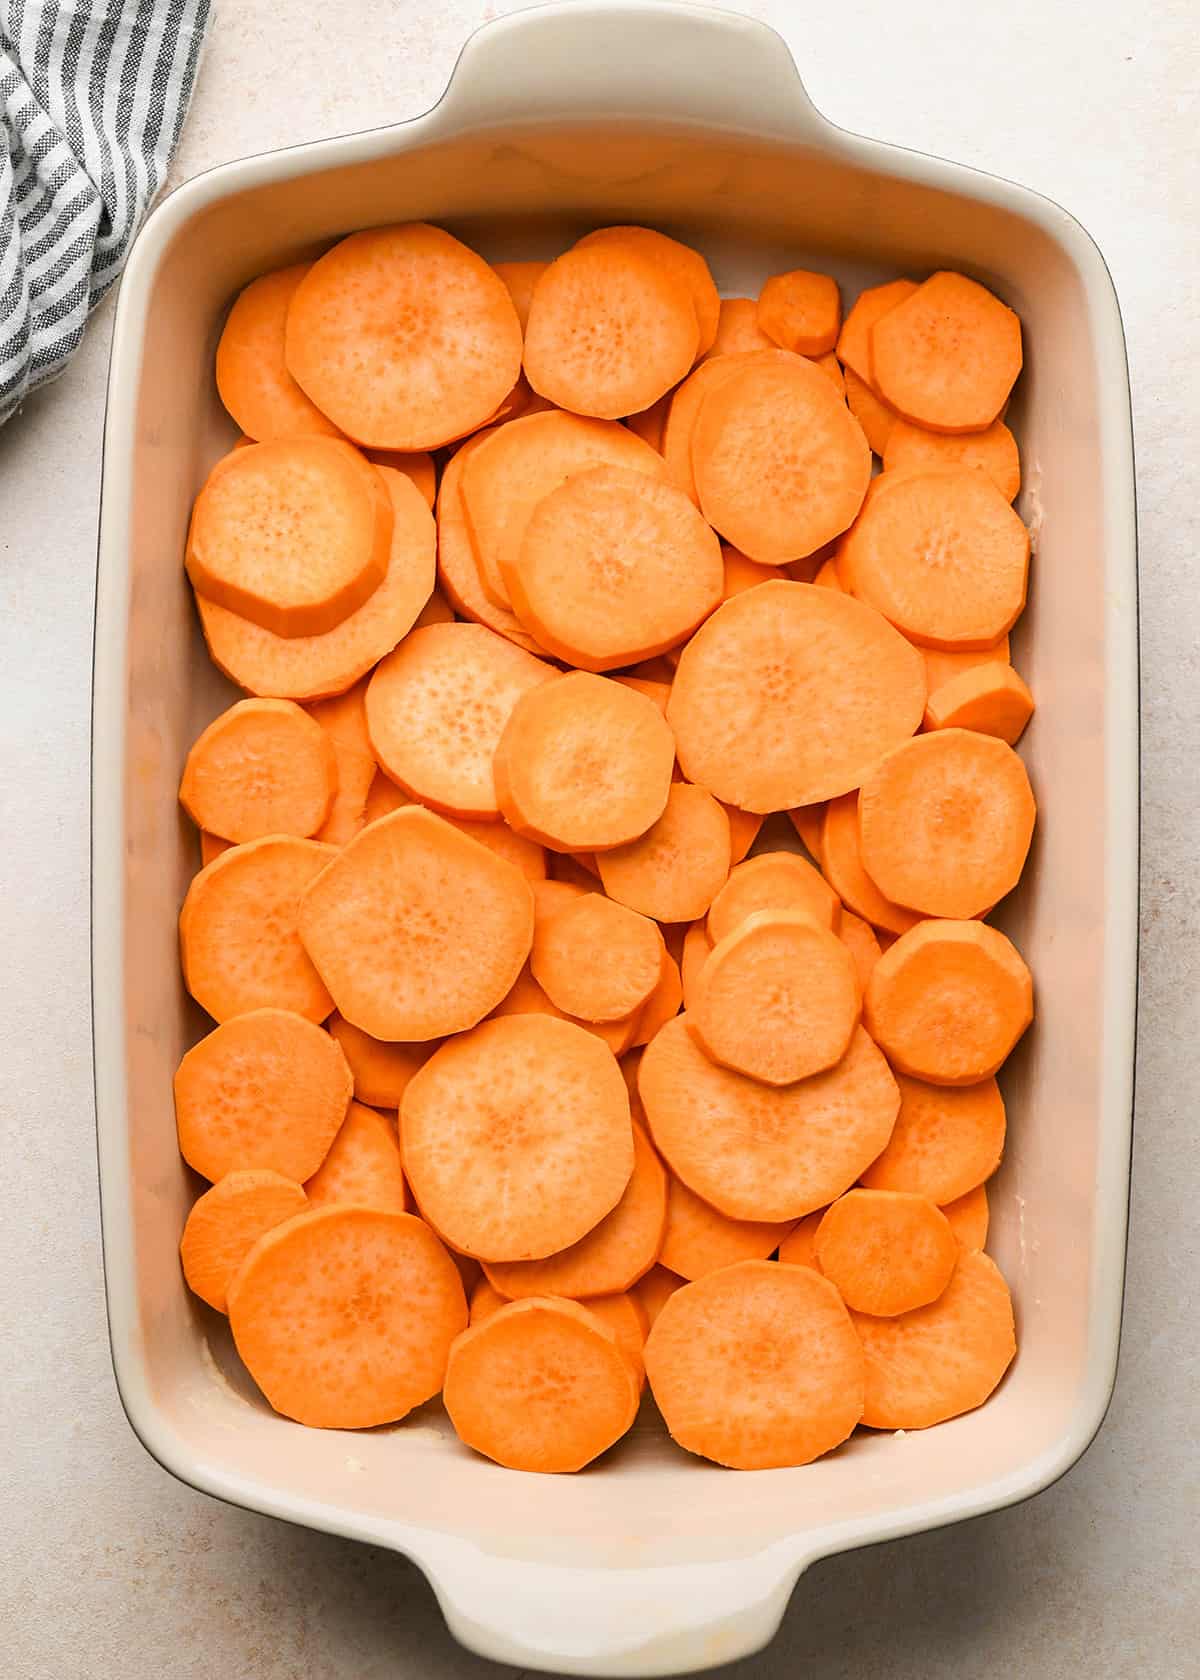 round sweet potato slices arranged in layers in a baking dish to make candied yams